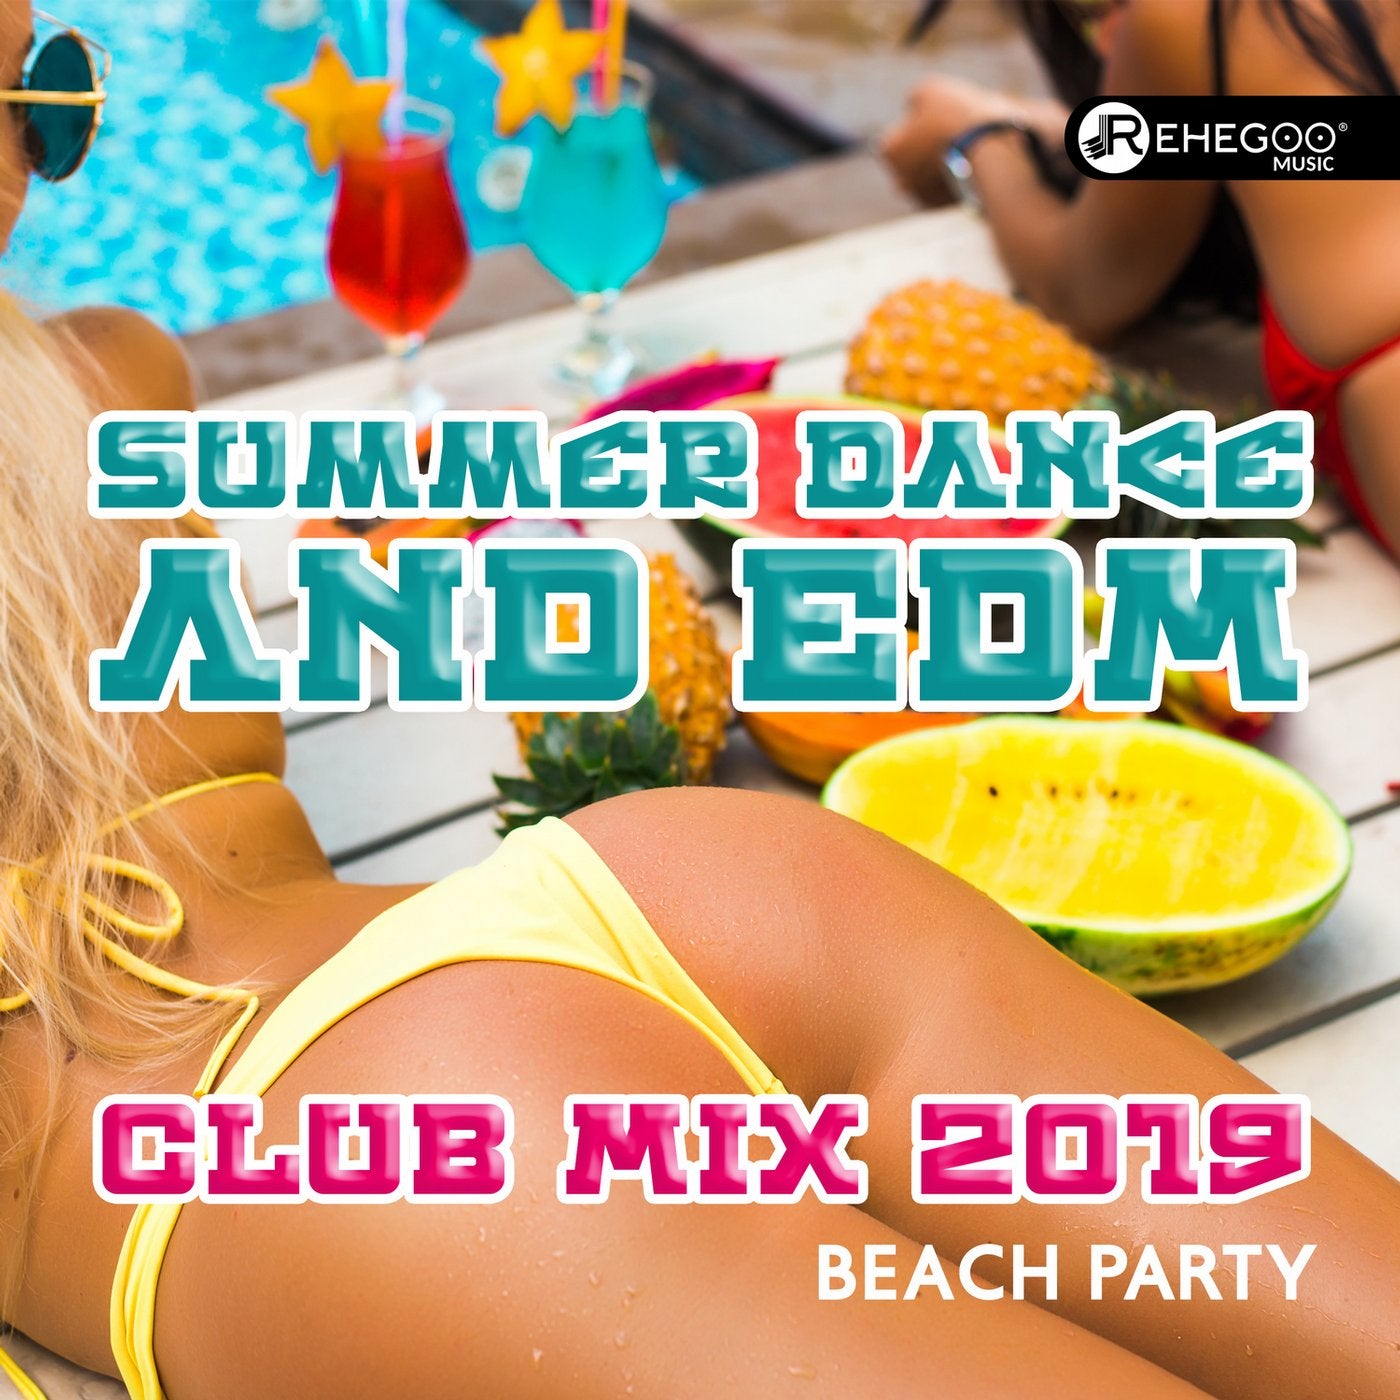 Summer Dance and EDM Club Mix 2019 - Beach Party